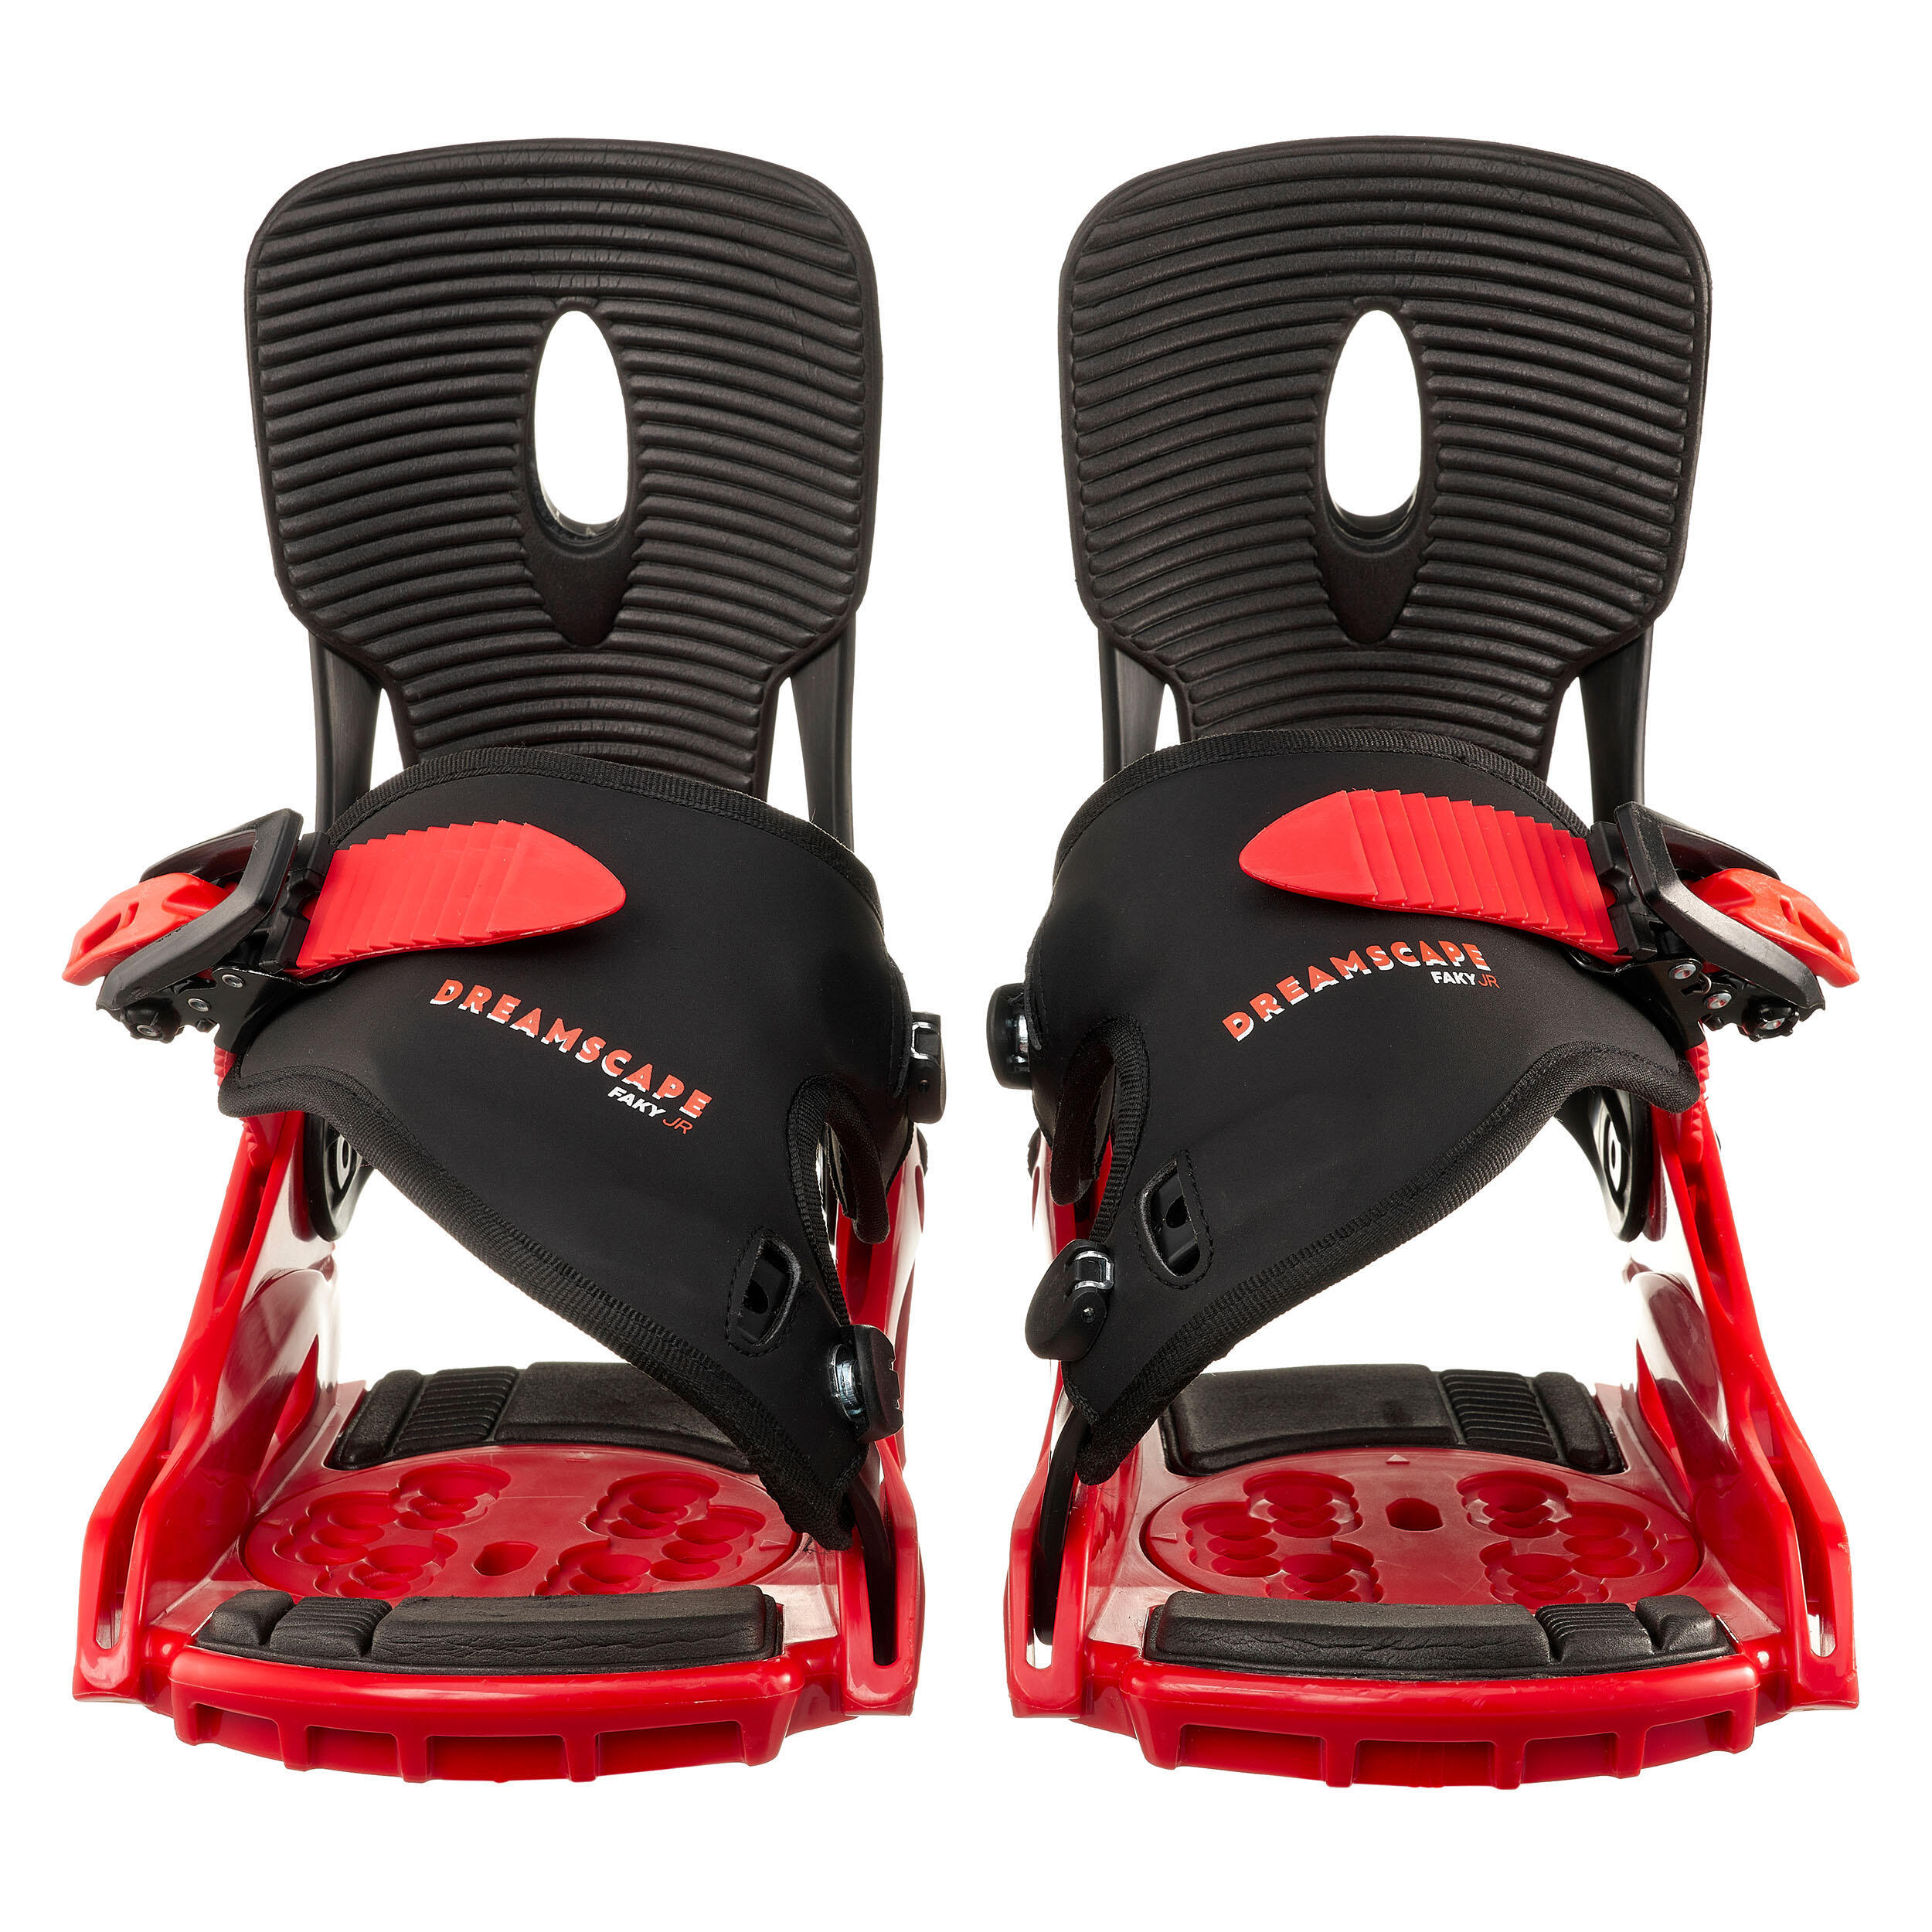 Kids’ Quick Snowboard Bindings  - Faky S - Black and Red 2/9